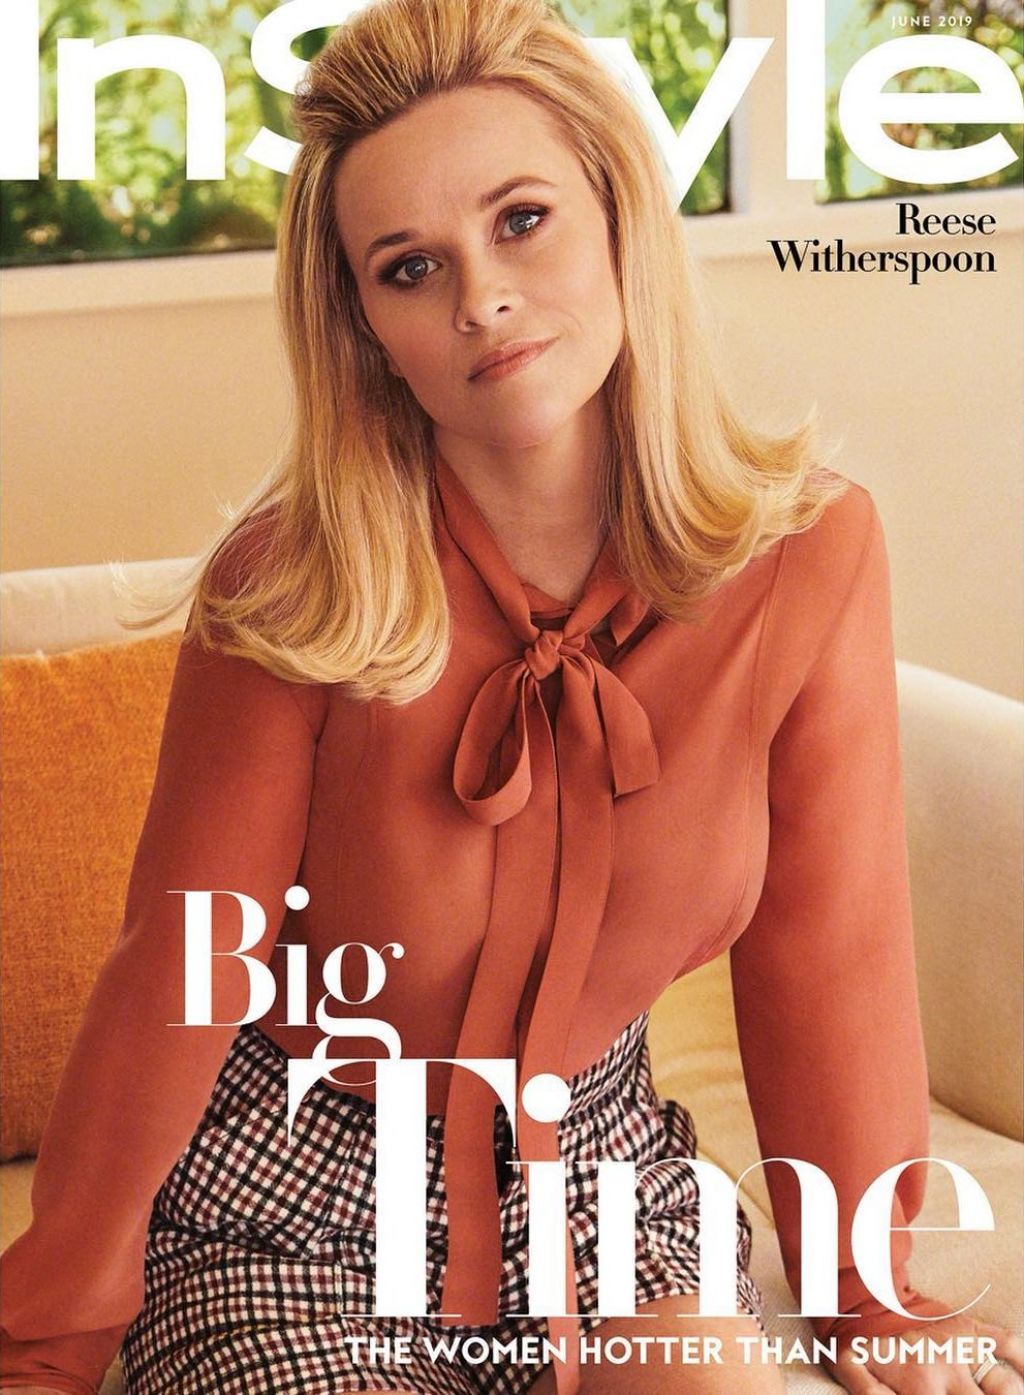 https://celebmafia.com/wp-content/uploads/2019/05/reese-witherspoon-instyle-magazine-june-2019-issue-0.jpg